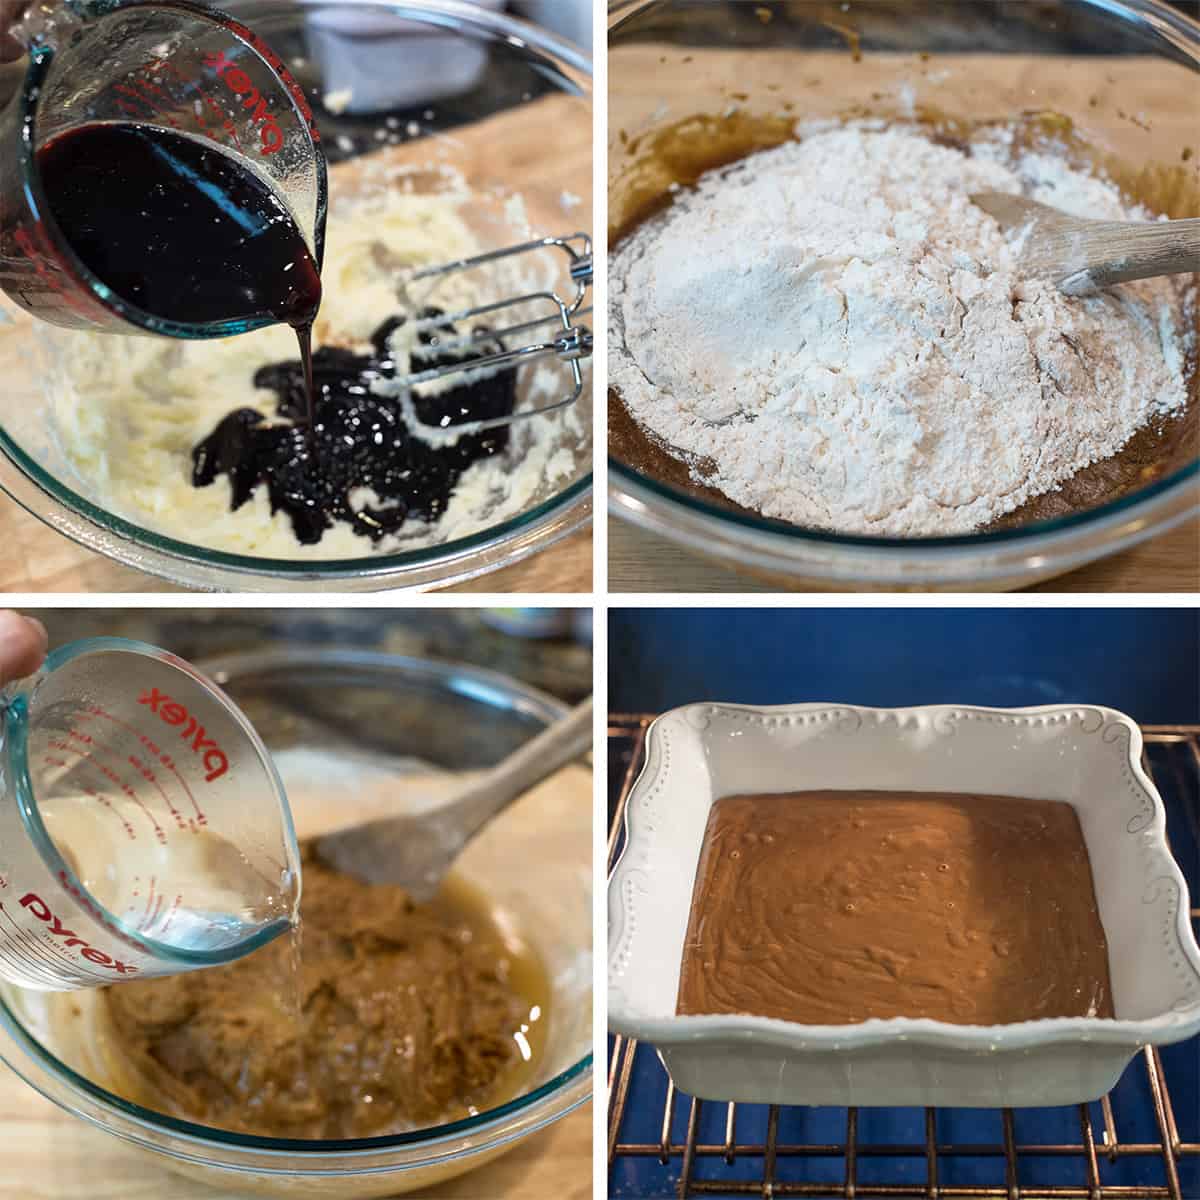 Four images of gingerbread cake batter being mixed in a bowl and baked in the oven in a small baking dish.